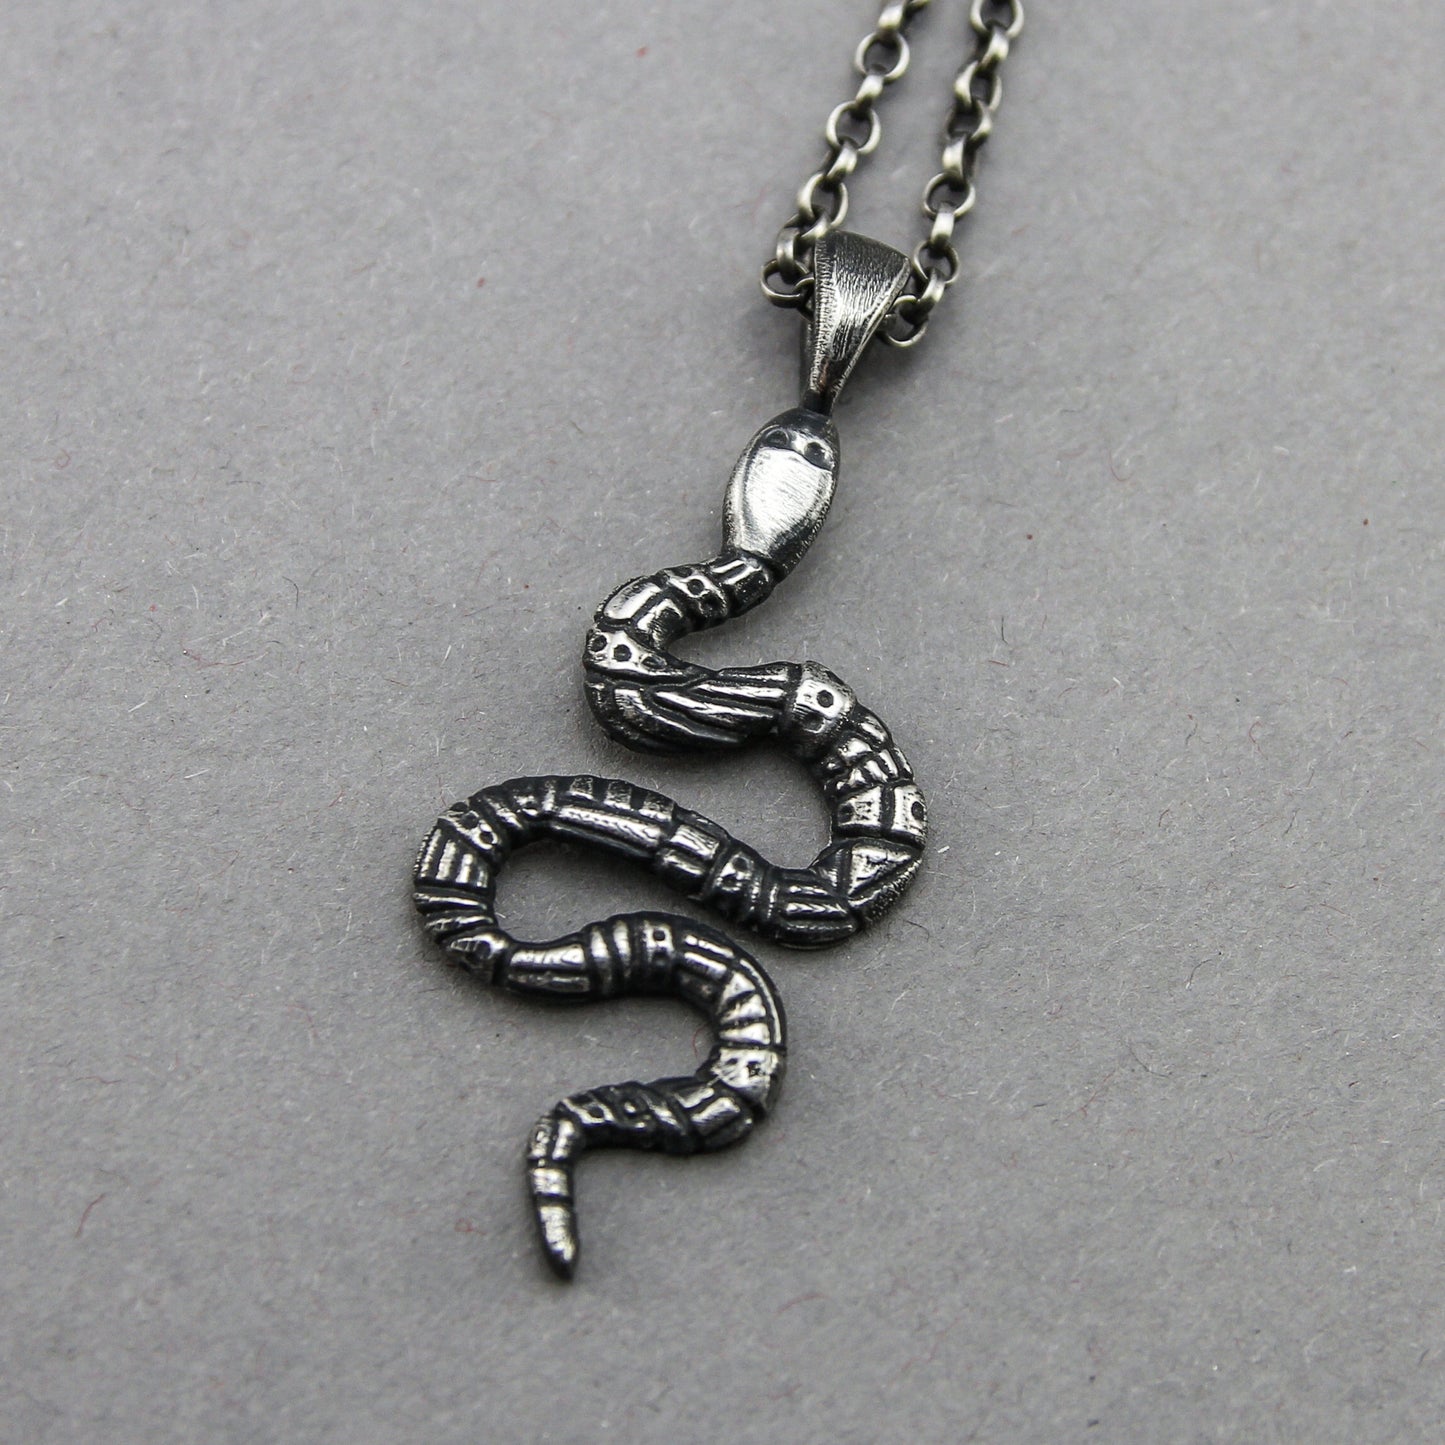 ornamented handcrafted silver snake pendant